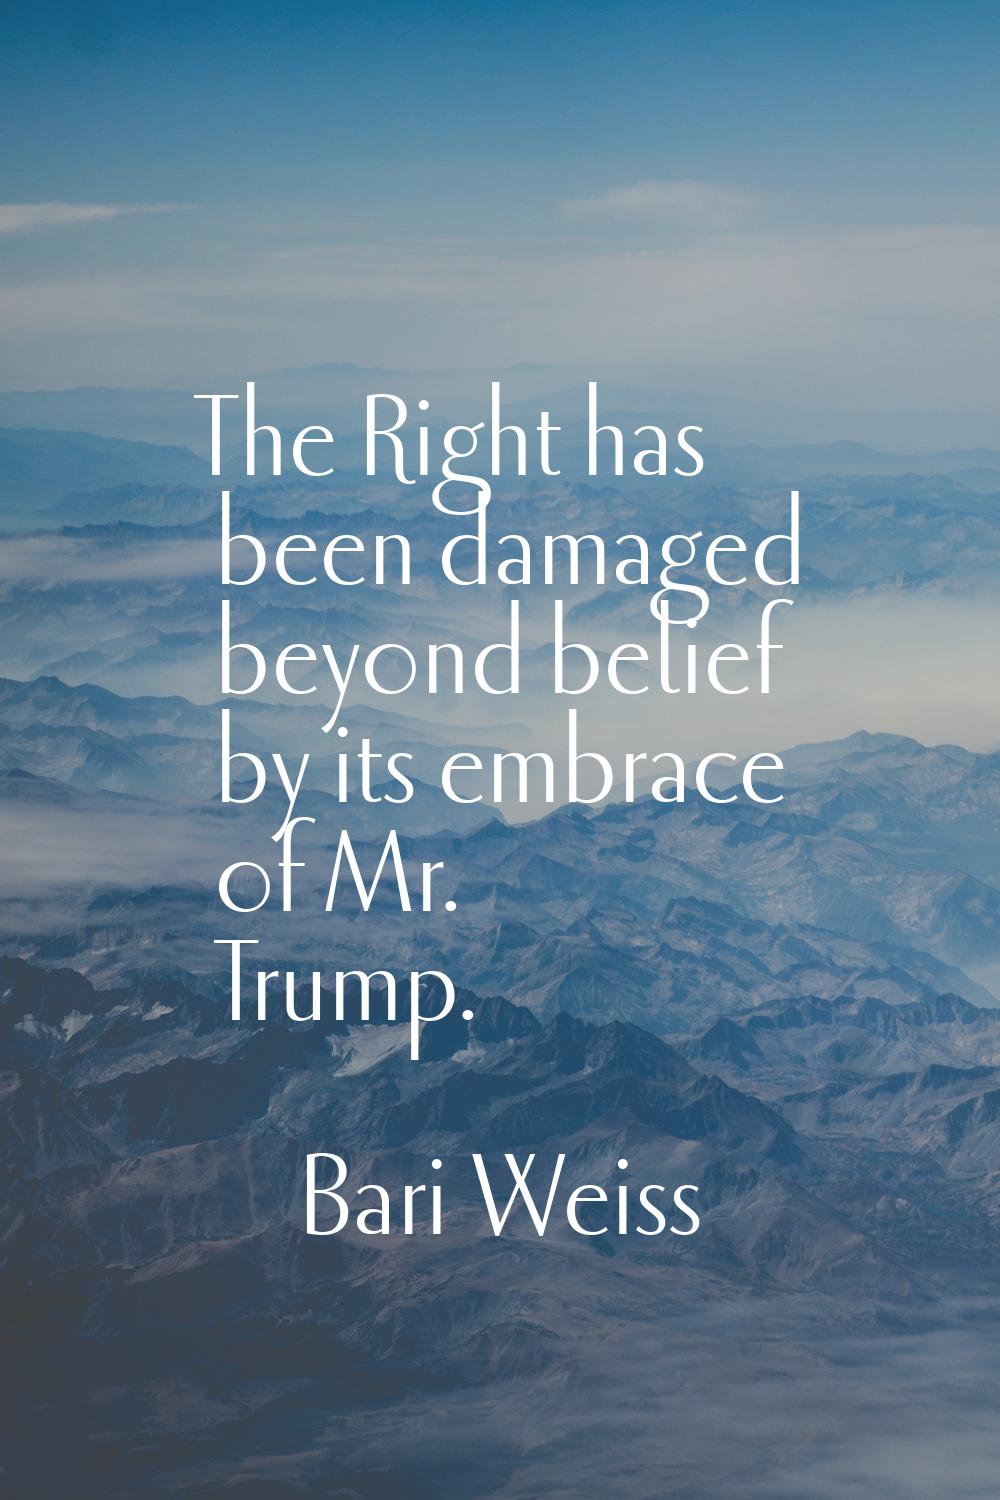 The Right has been damaged beyond belief by its embrace of Mr. Trump.